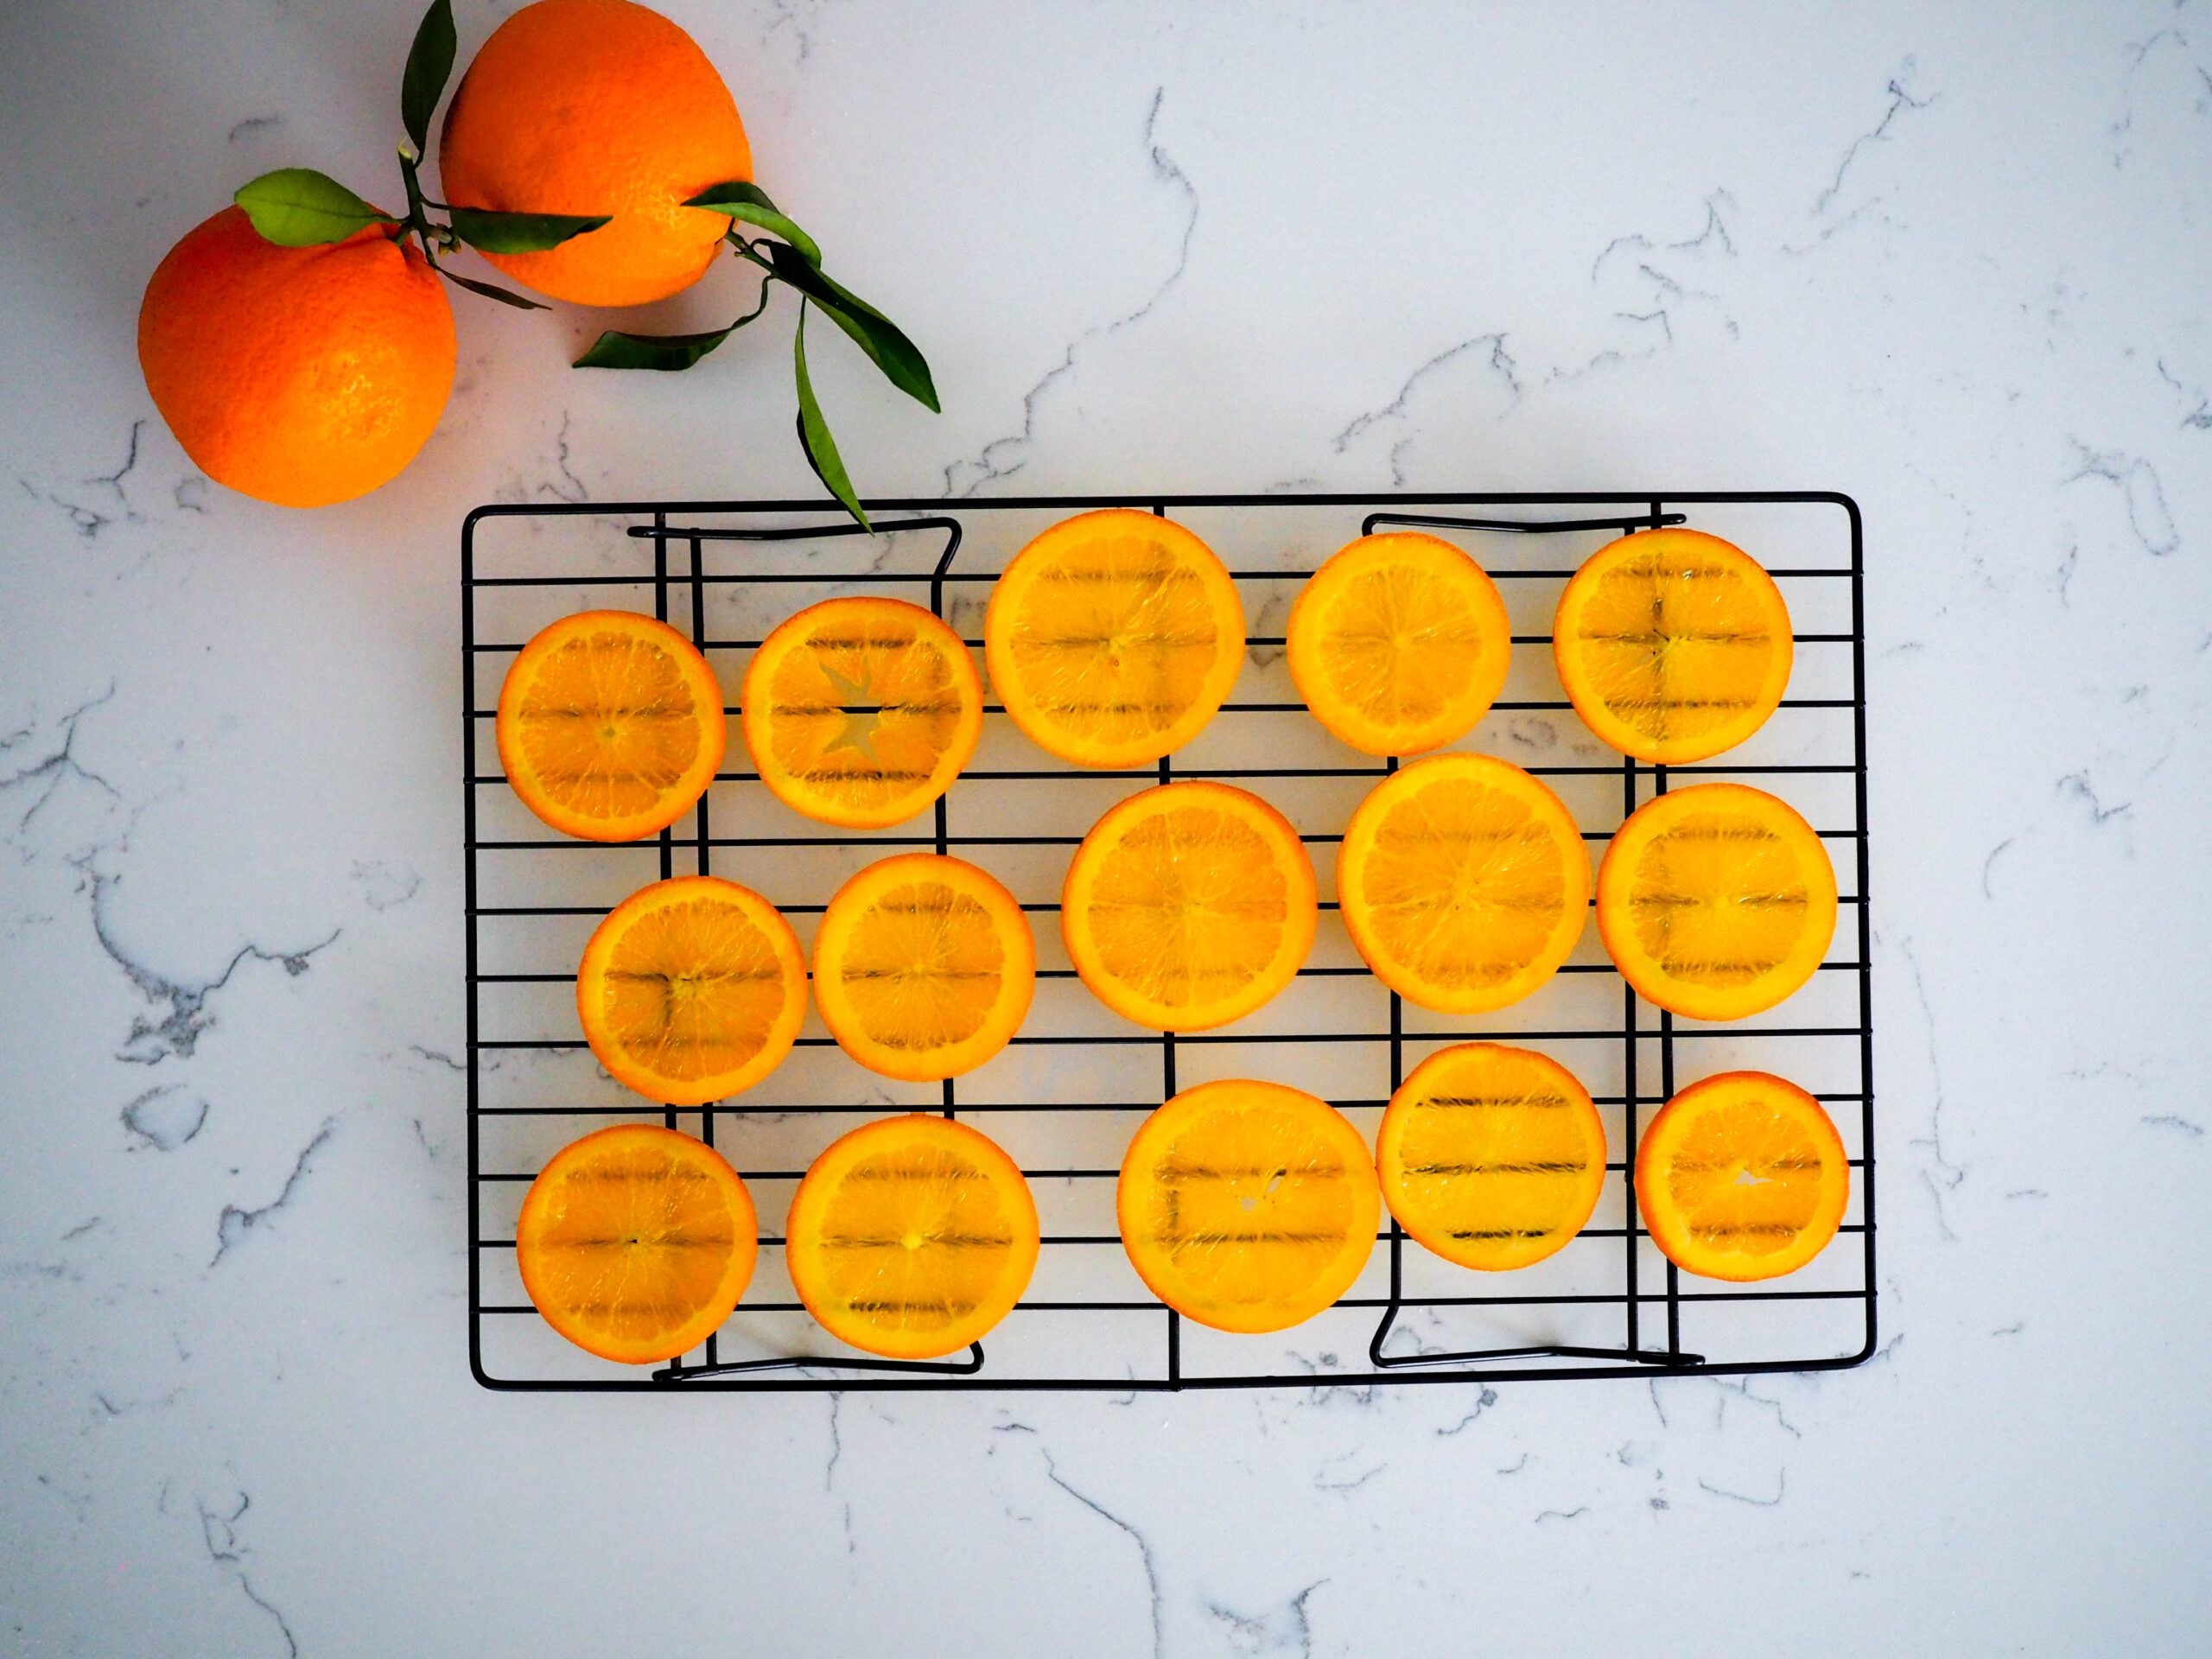 Fifteen orange slices dry on a wire rack with two leafy oranges beside them.